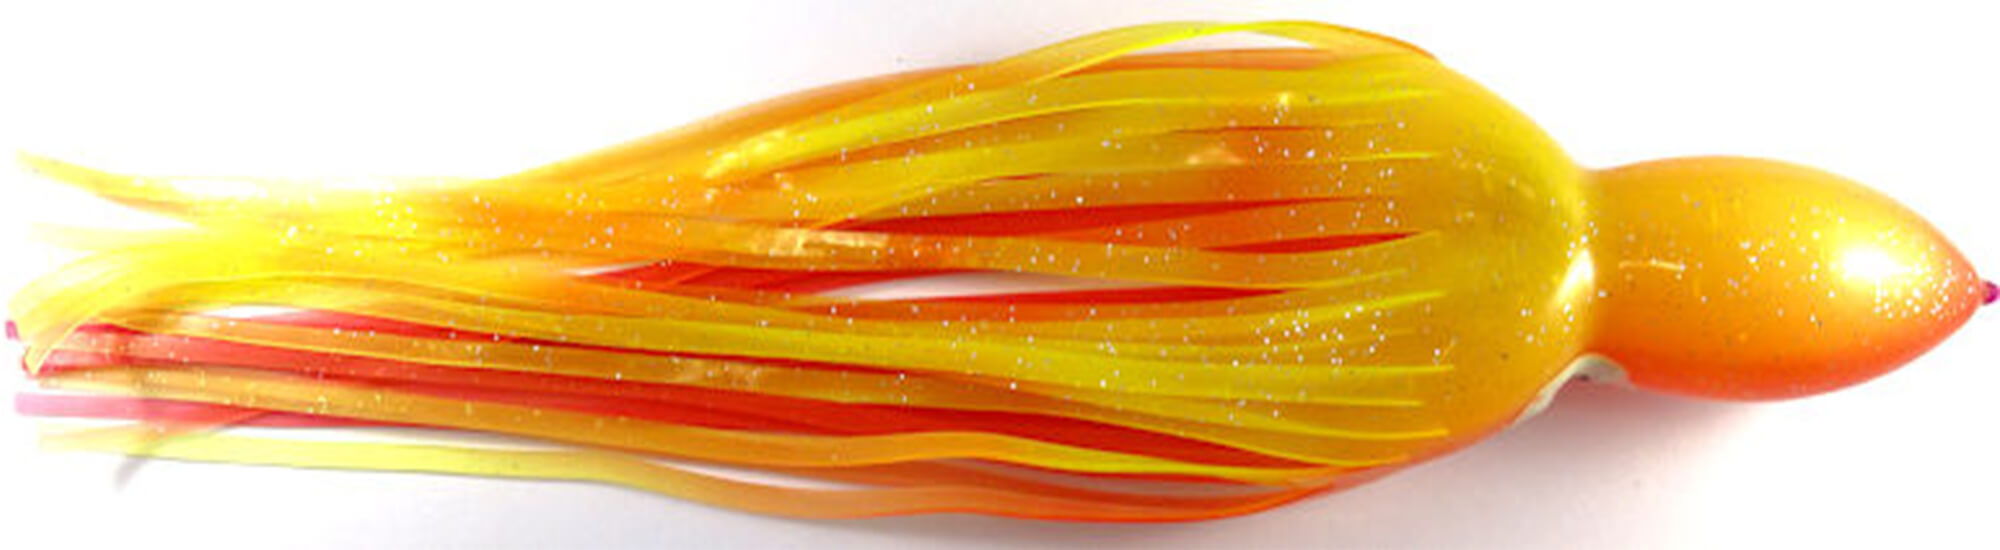 Yo-Zuri Octopus Trolling Skirts - Skirts for Marlin Lures